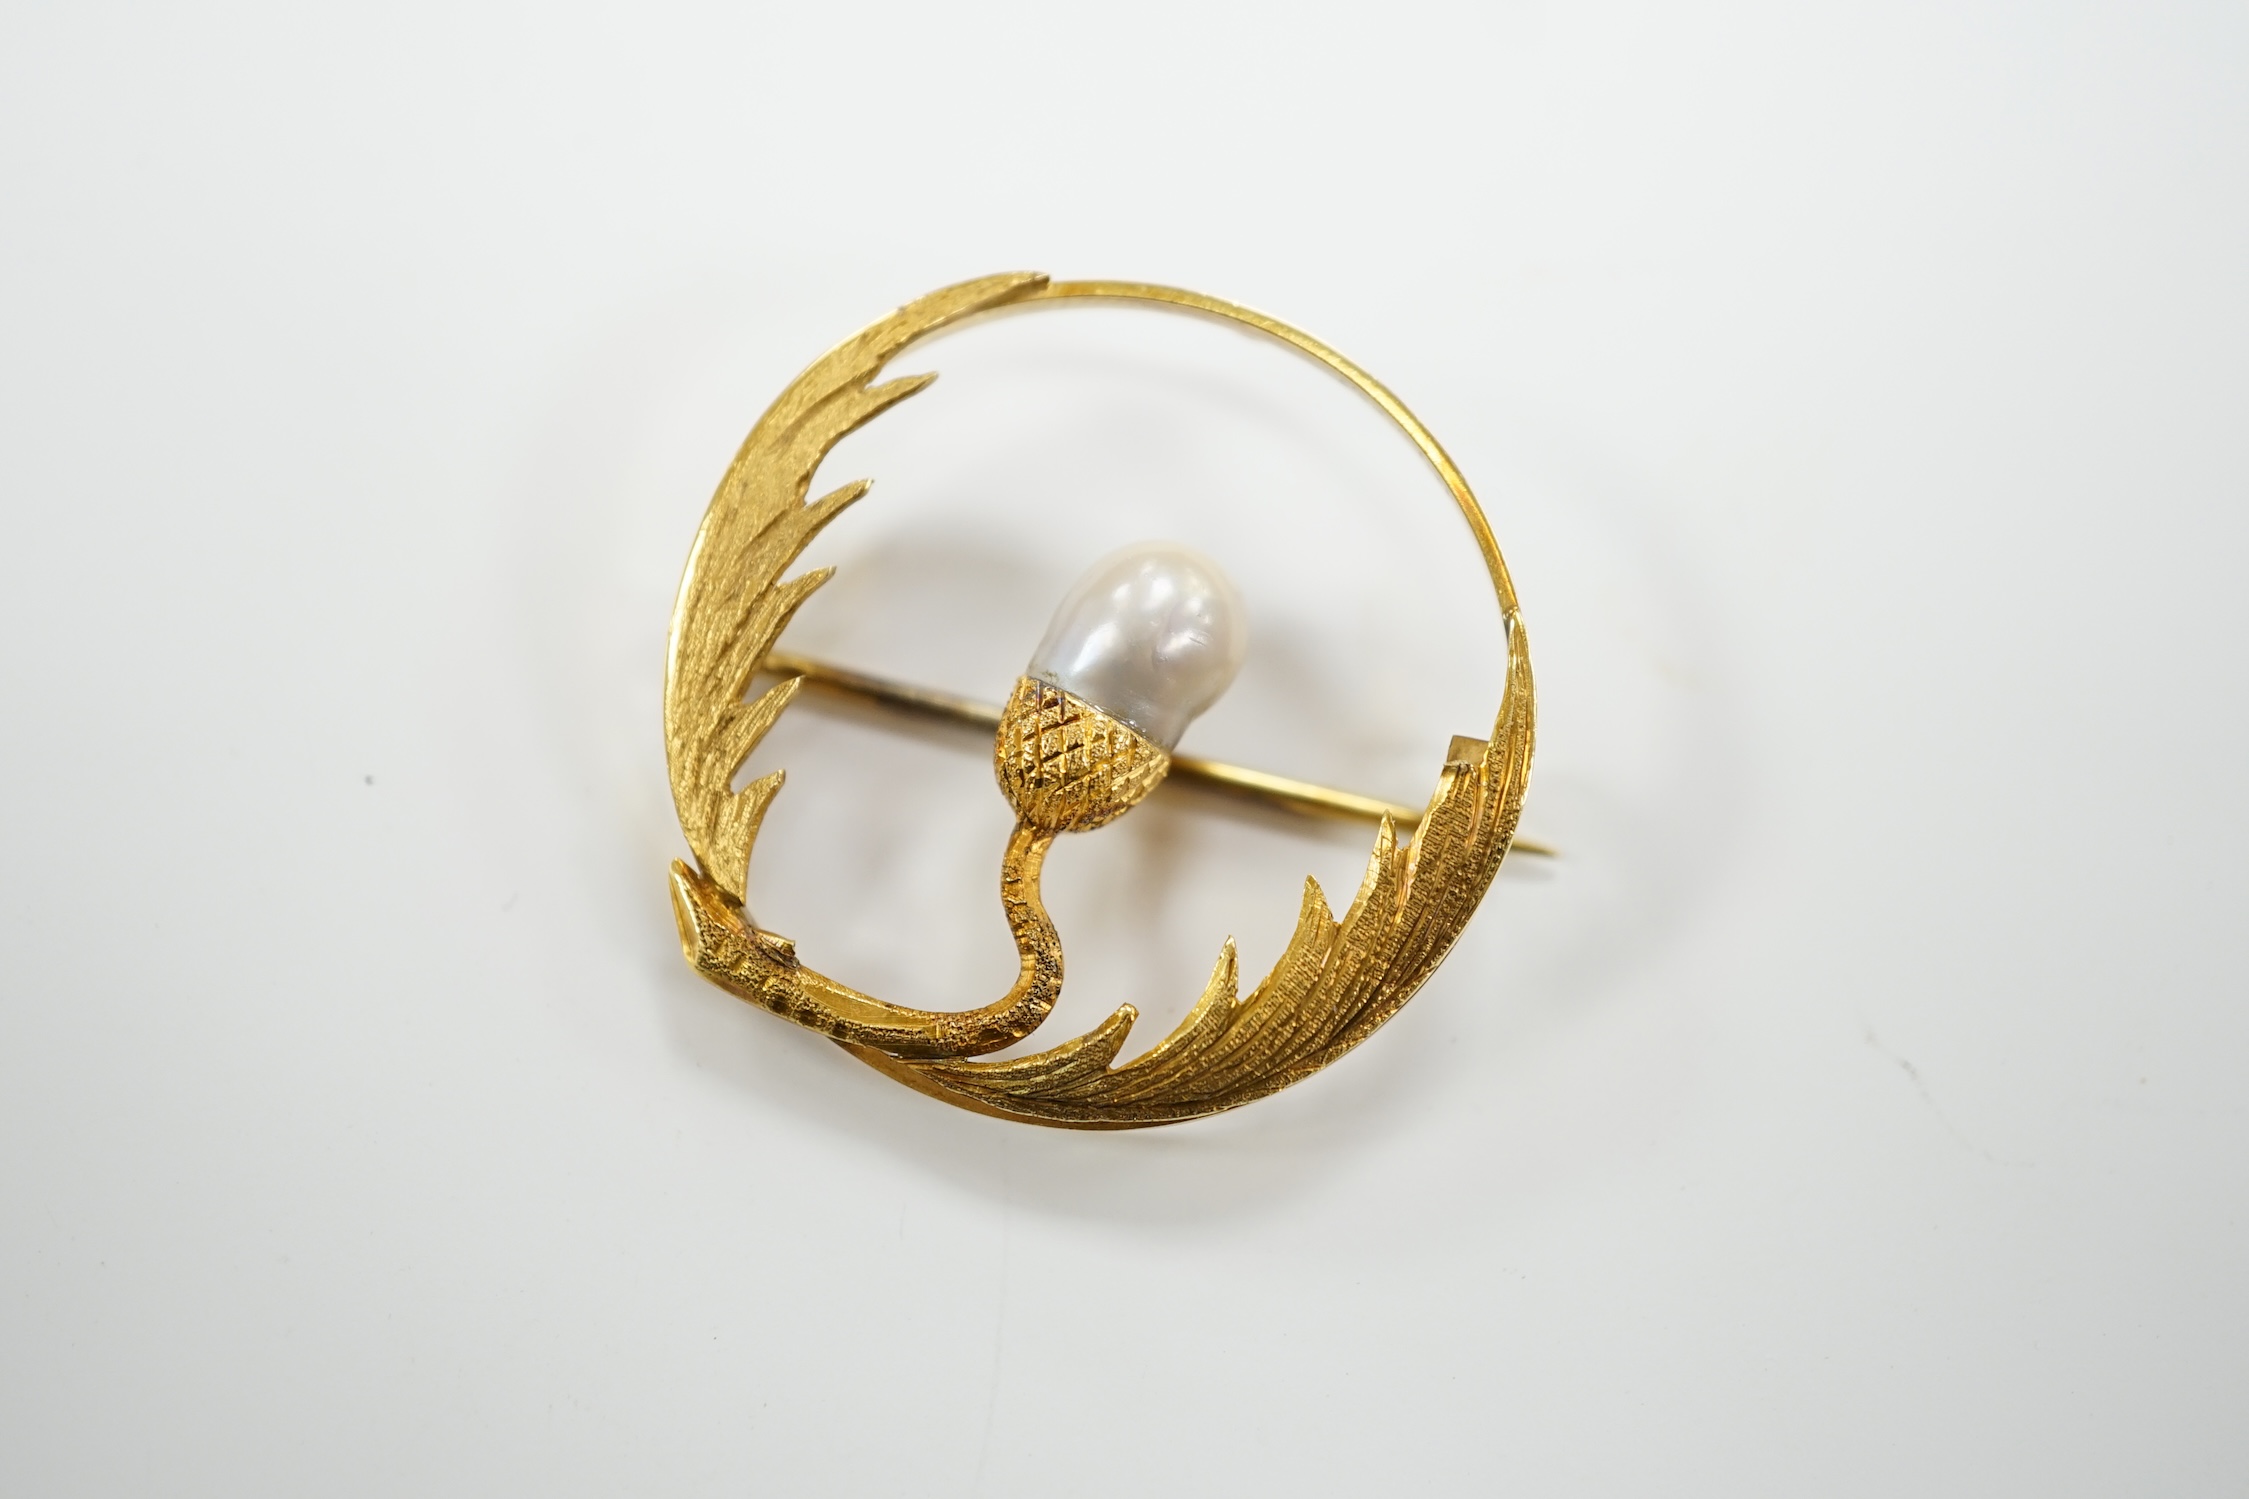 A late Victorian 15ct and baroque pearl set open work thistle brooch, 34mm, gross weight 6.1 grams.